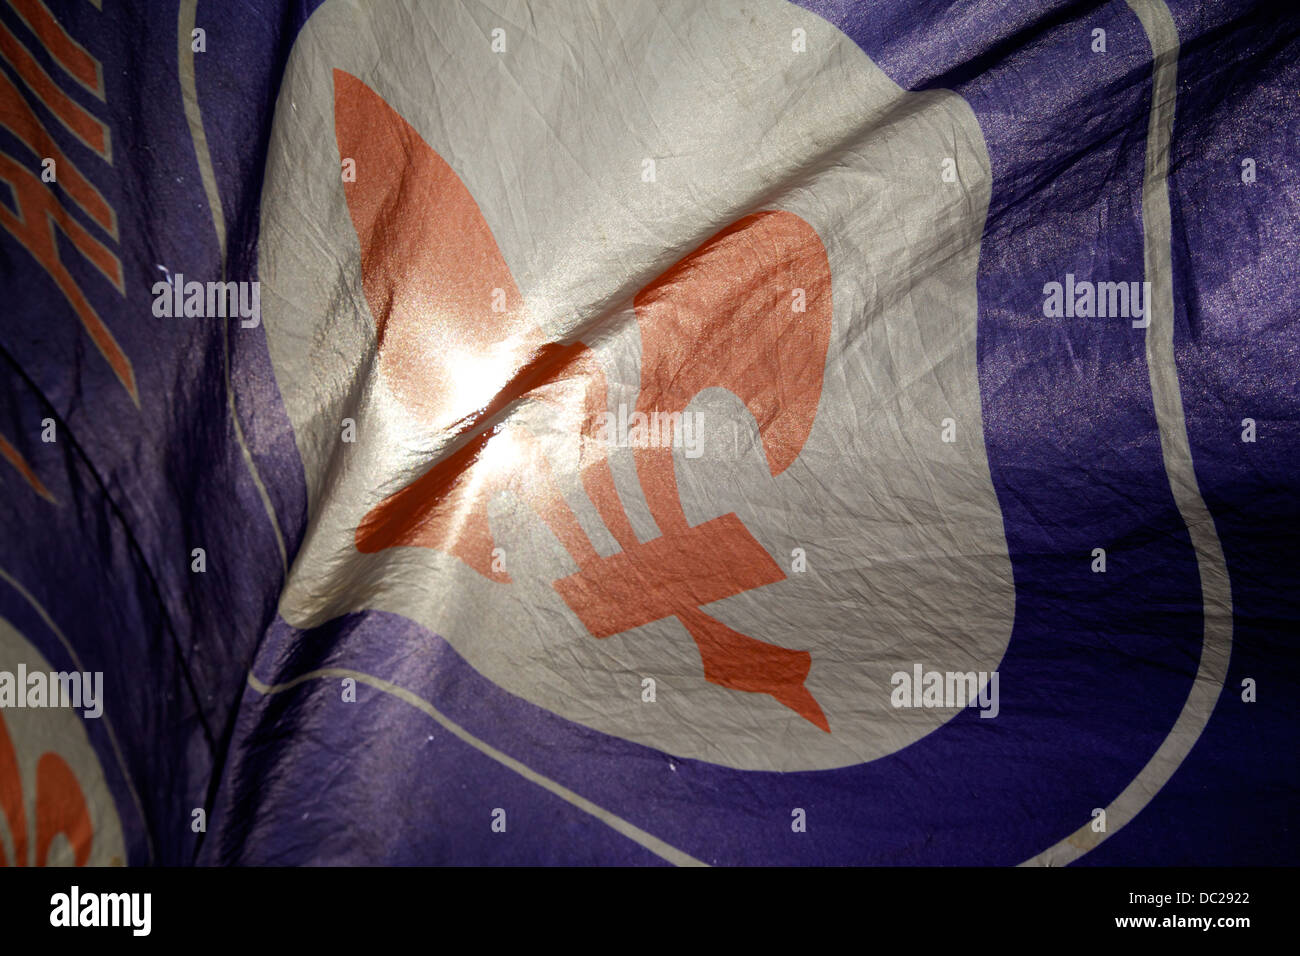 ACF Fiorentina, Fiorentina Flag in Round Shape Isolated with Four Different  Waving Style, Bump Texture, 3D Rendering 24797922 PNG